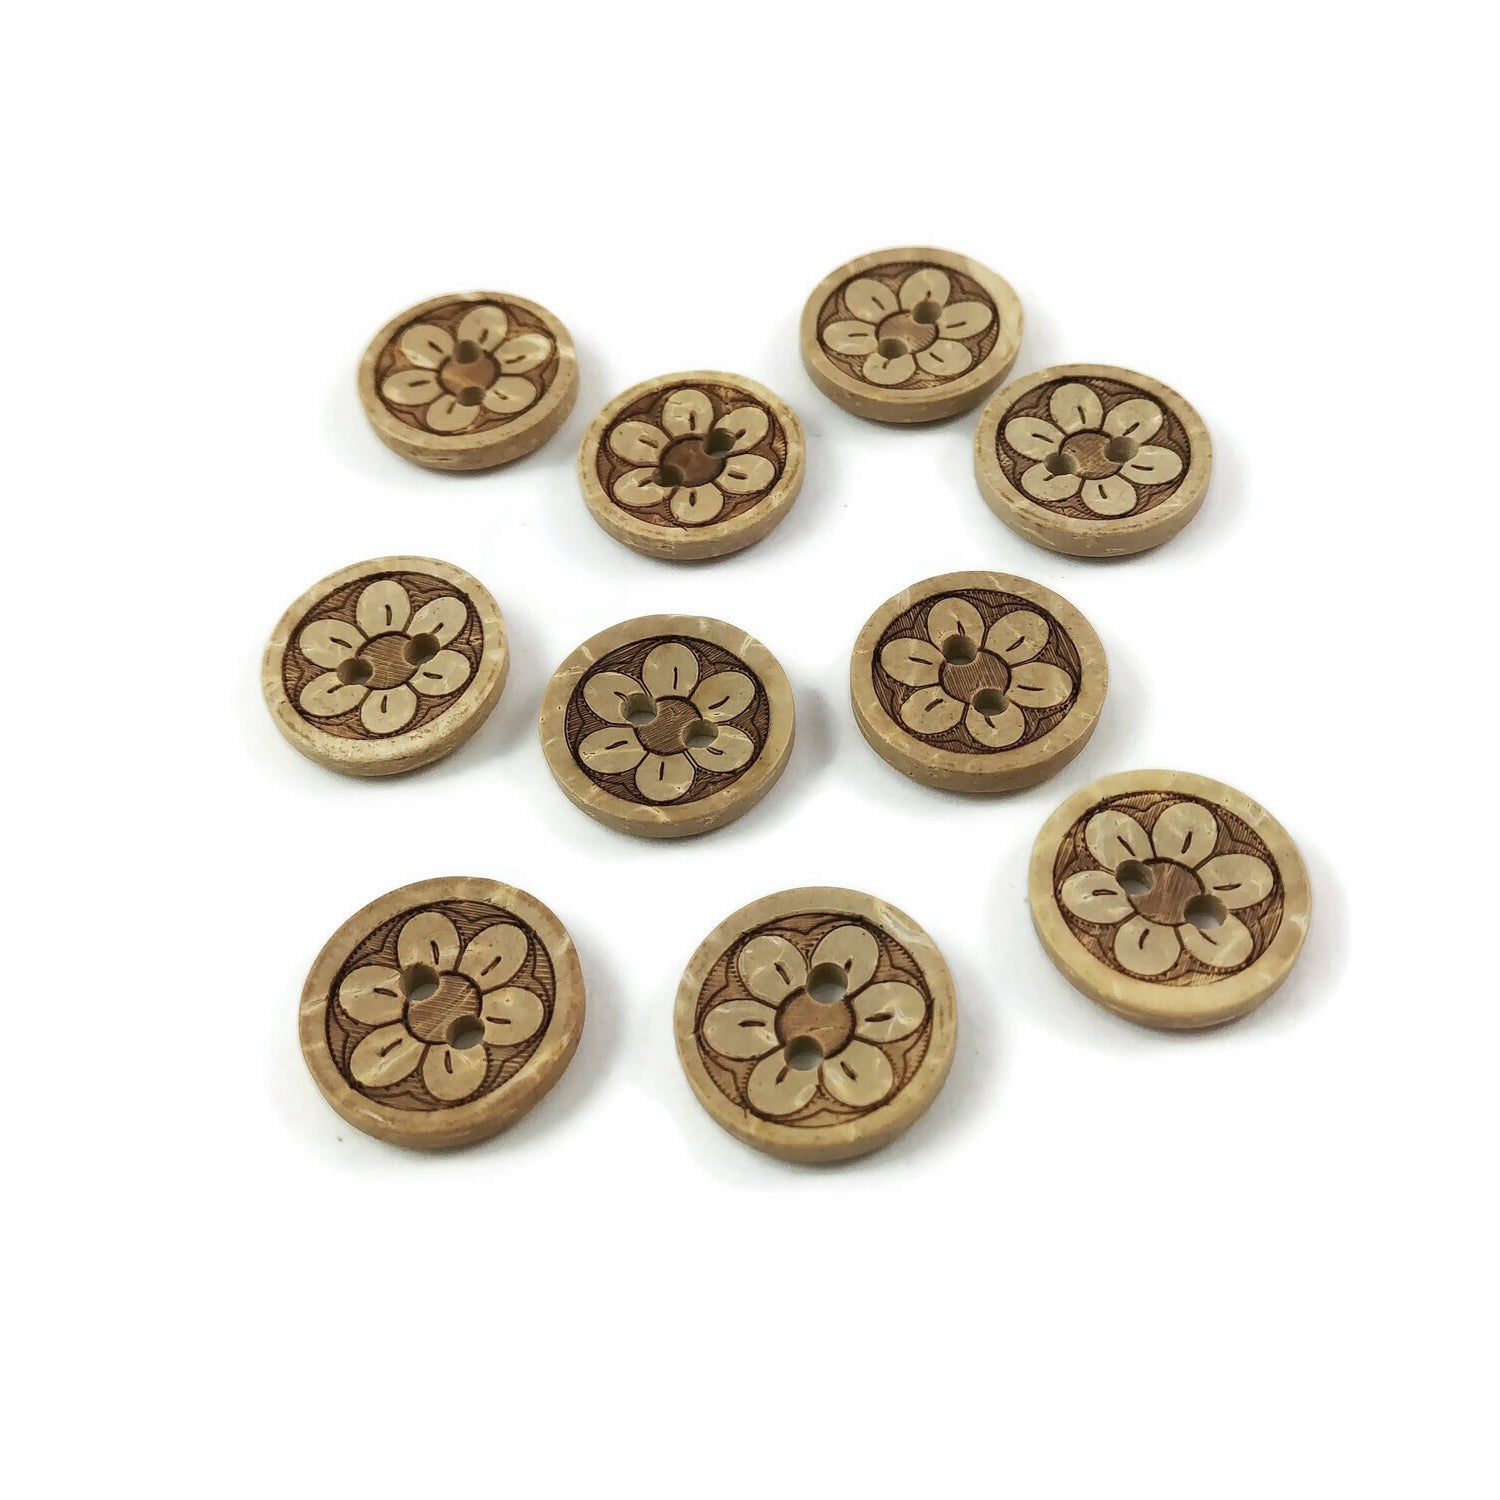 10 Coconut Shell Buttons 13 or 15mm - Daisy Flower